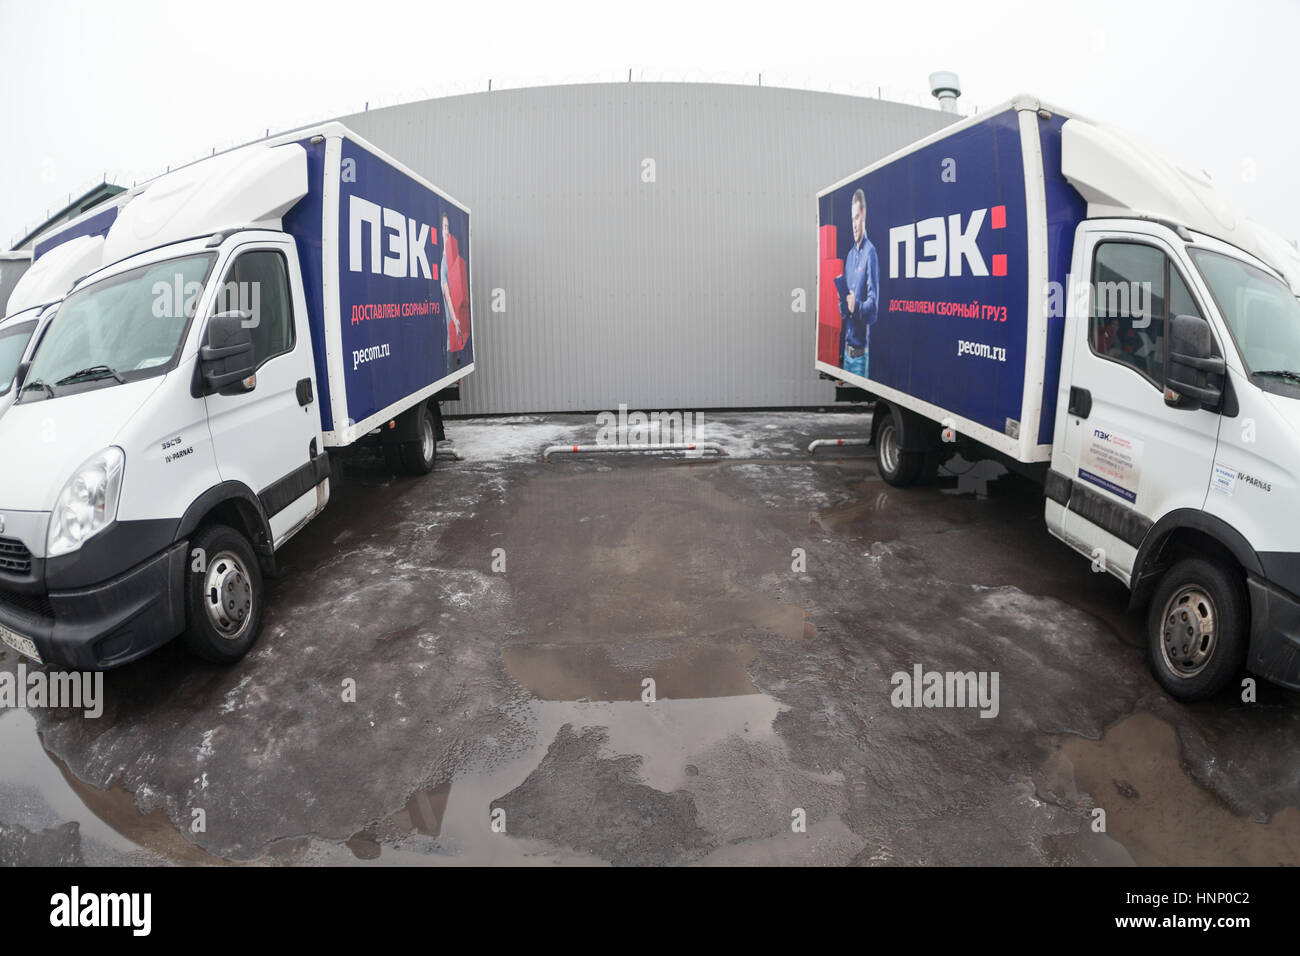 ST. PETERSBURG, RUSSIA - CIRCA JAN, 2016: Wide angle view of light lorries parking lot. Russian transportation company PEC (First expedition company)  Stock Photo